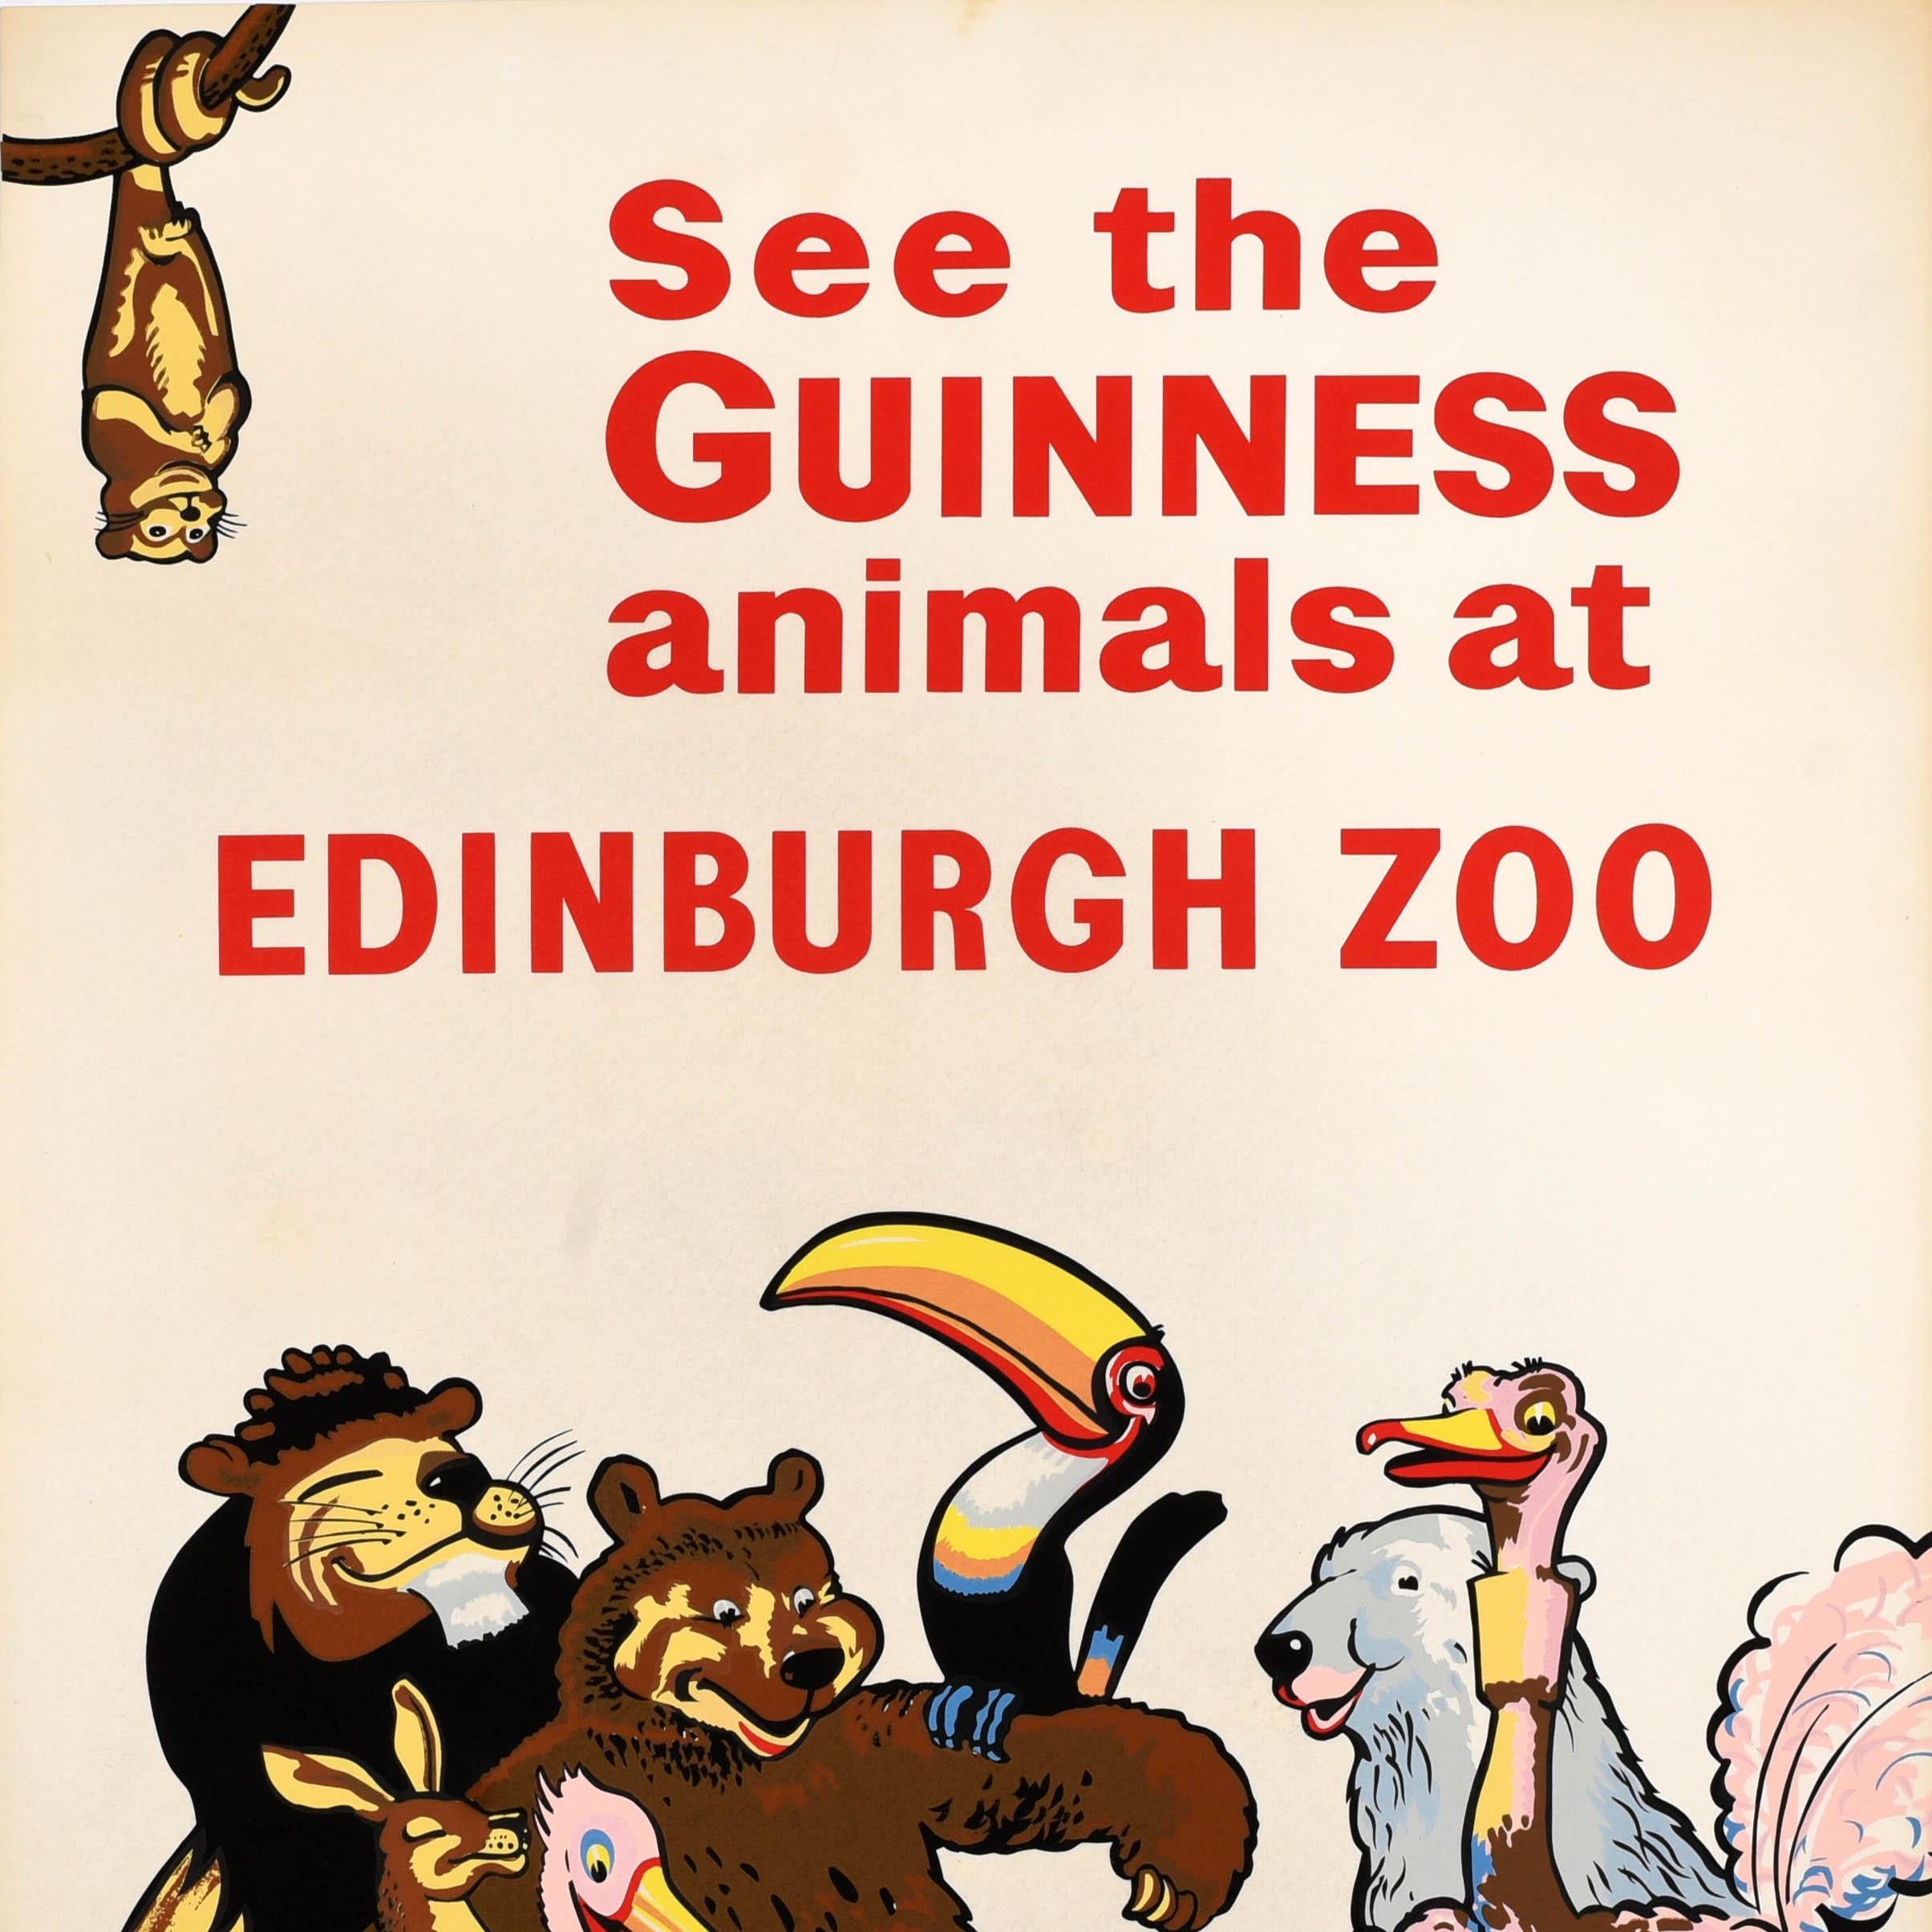 Original vintage drink advertising poster for Guinness - See the Guinness Animals at Edinburgh Zoo - featuring a fun and colourful image of all the iconic Guinness animals gathered around a zoo keeper wearing a green uniform and cap and sitting on a